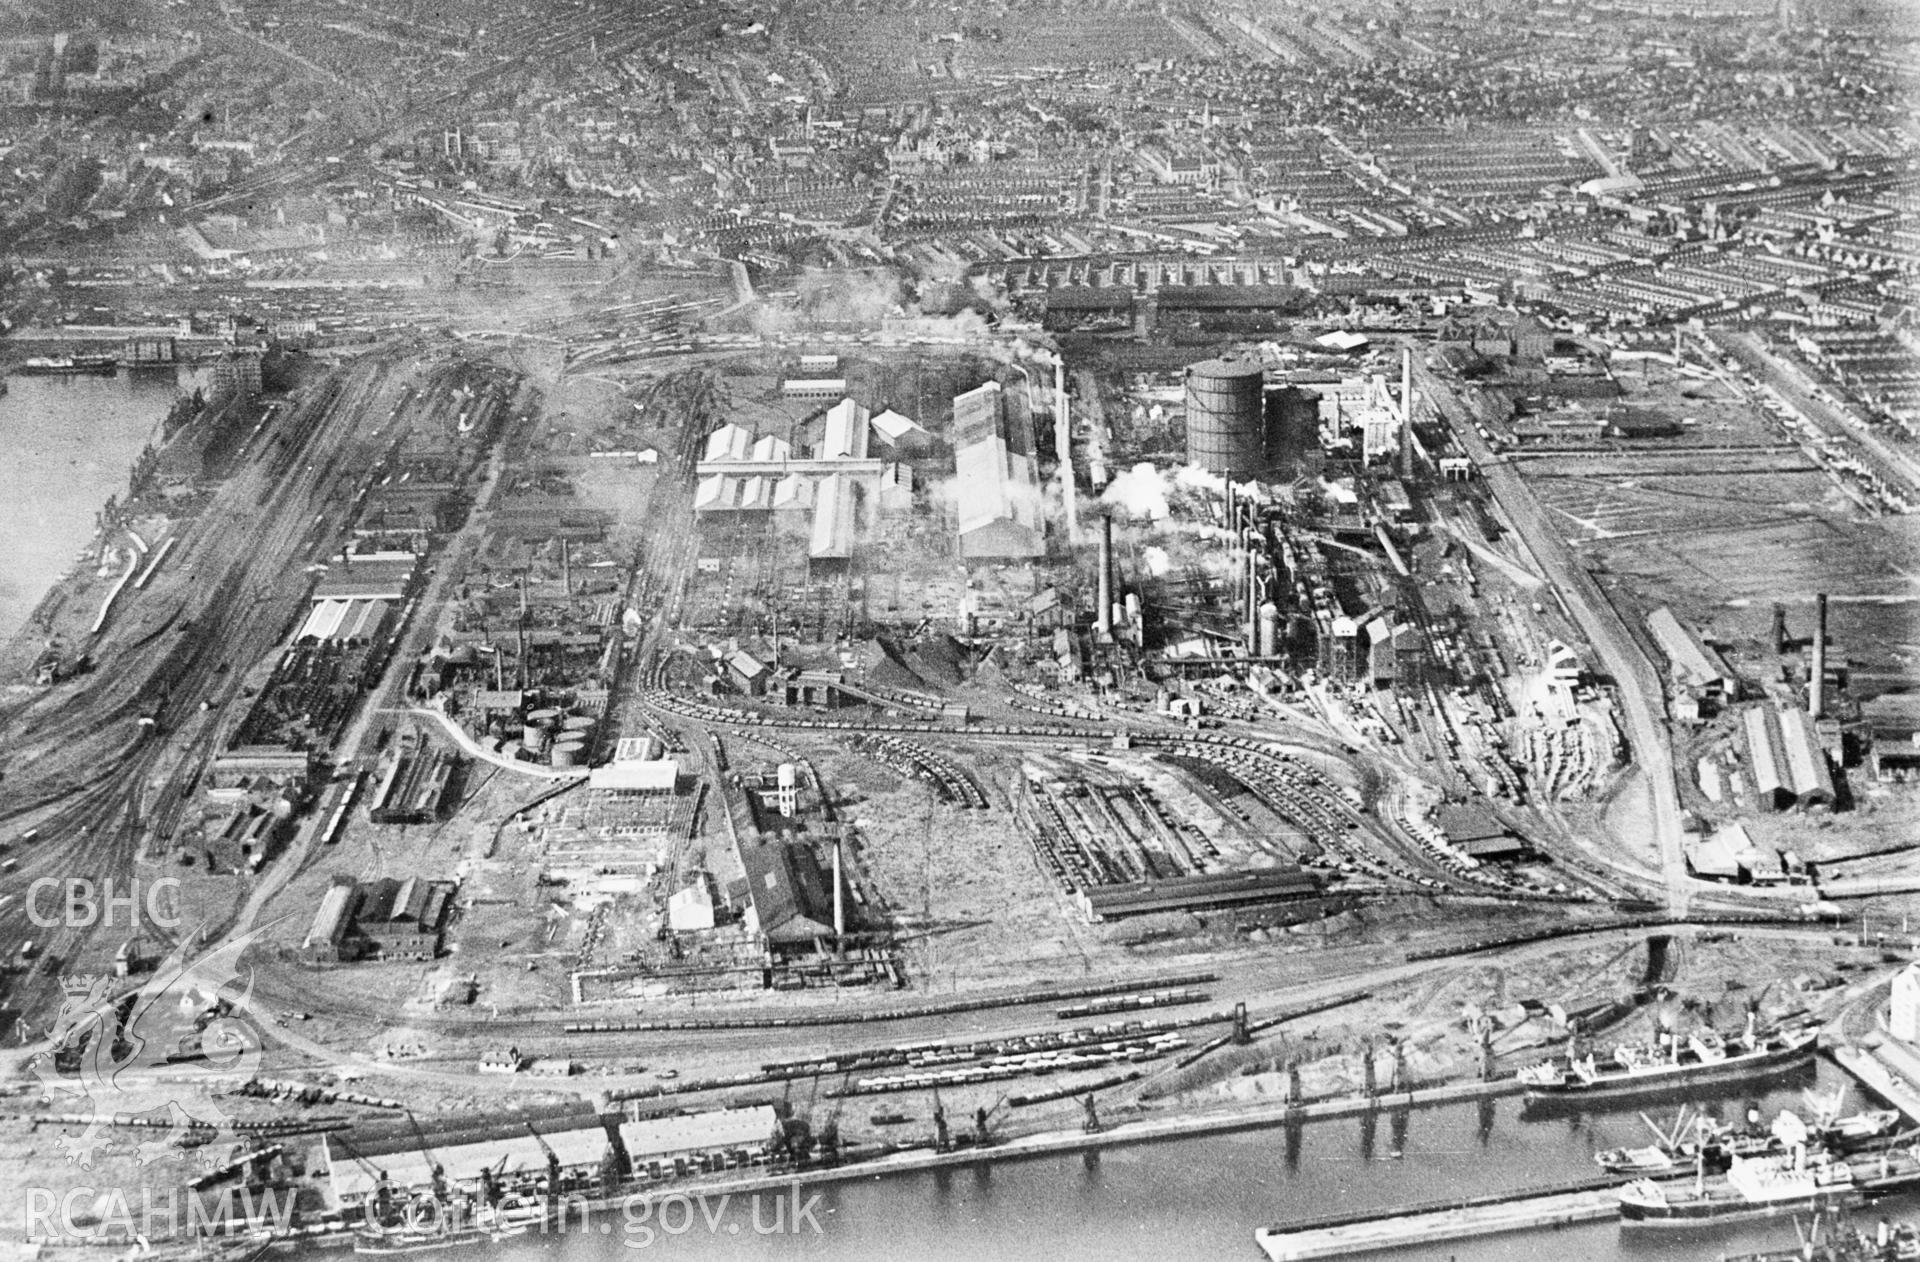 View of East Moors Ironworks, Cardiff. Oblique aerial photograph, 5?x4? BW glass plate.